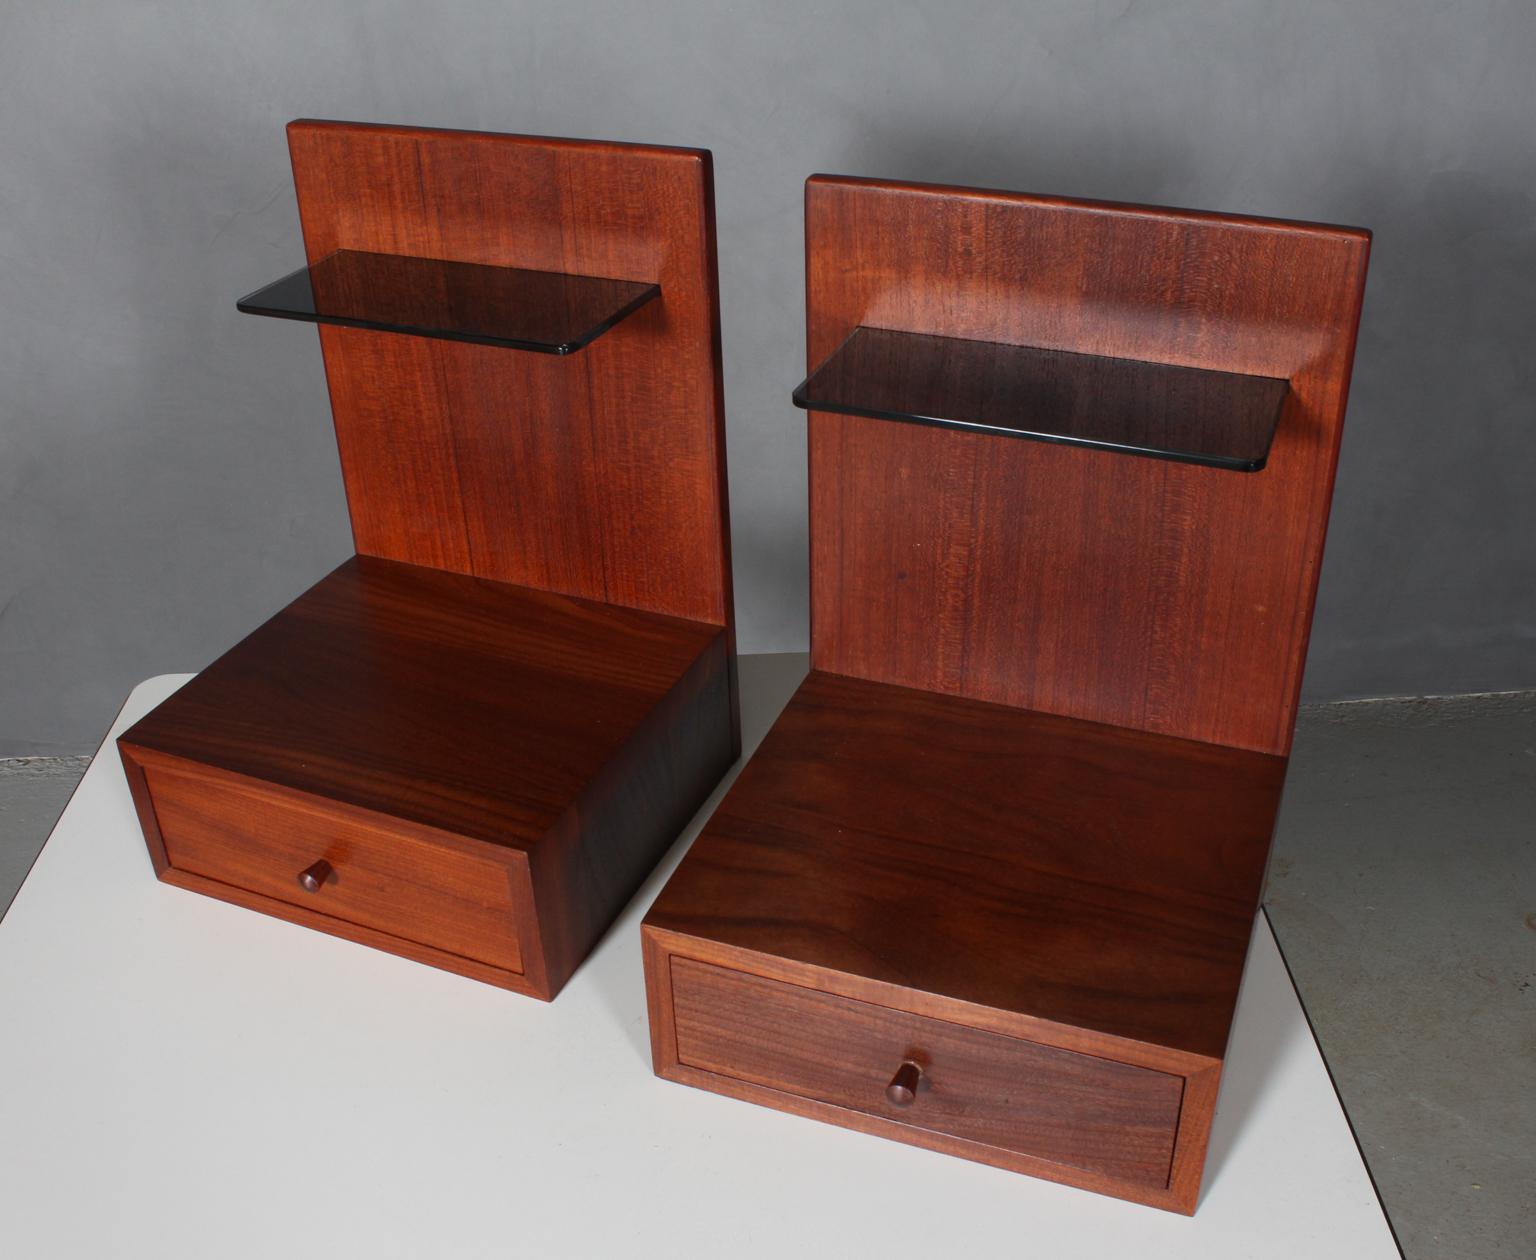 Pair of Wegner nightstands made in teak. With shelf of black glass.

One drawer.

Made by GETAMA in the 1960s.